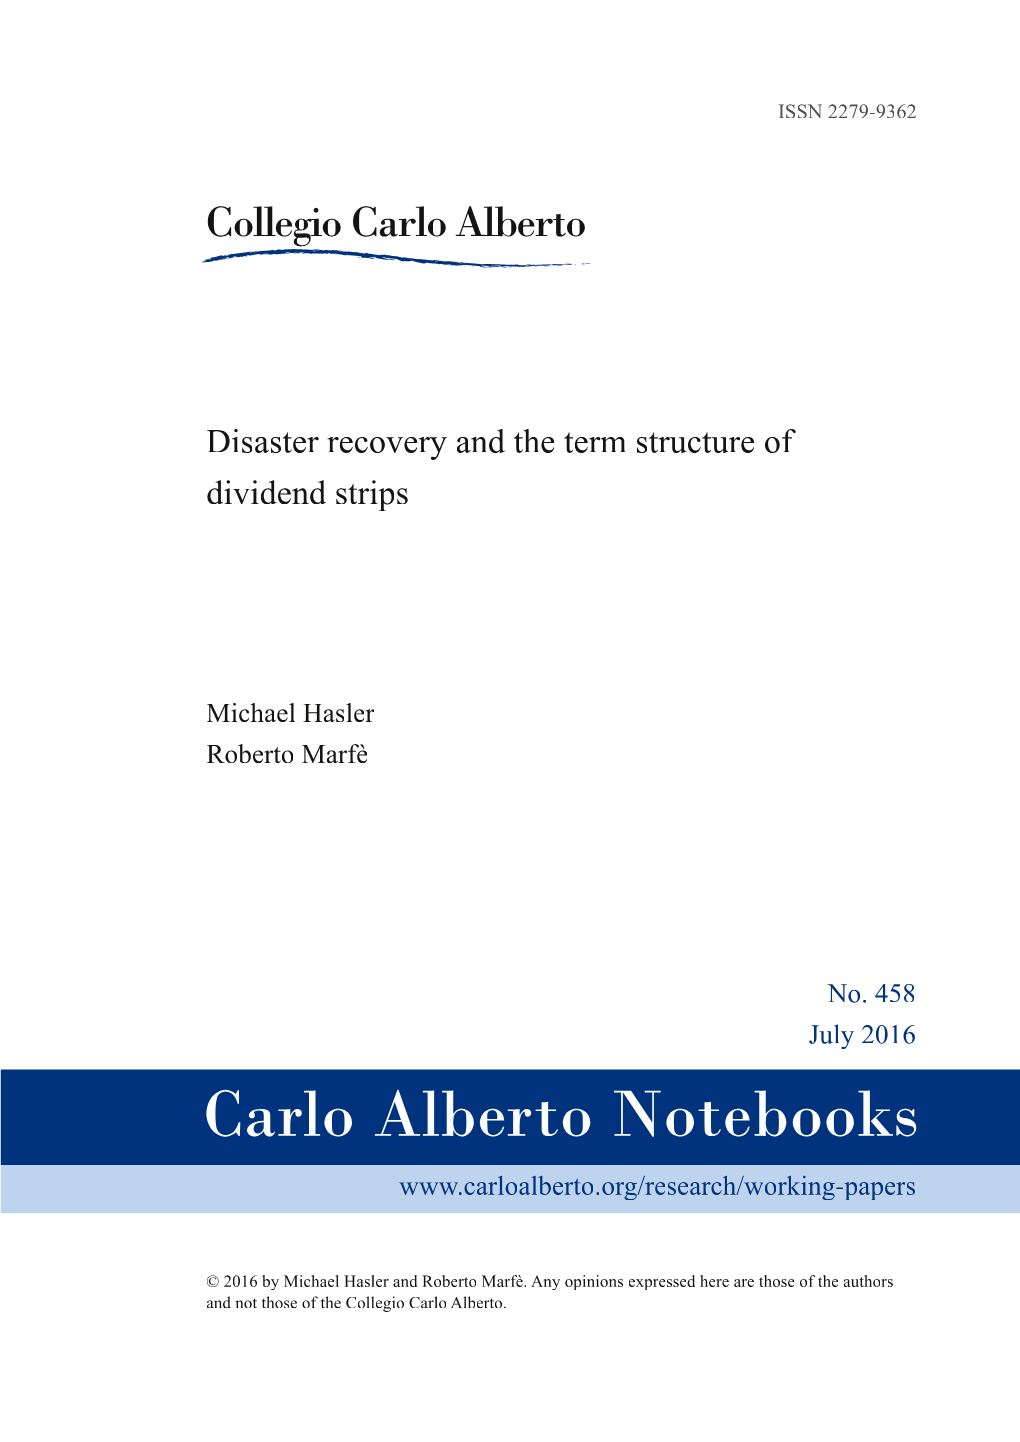 Disaster Recovery and the Term Structure of Dividend Strips?